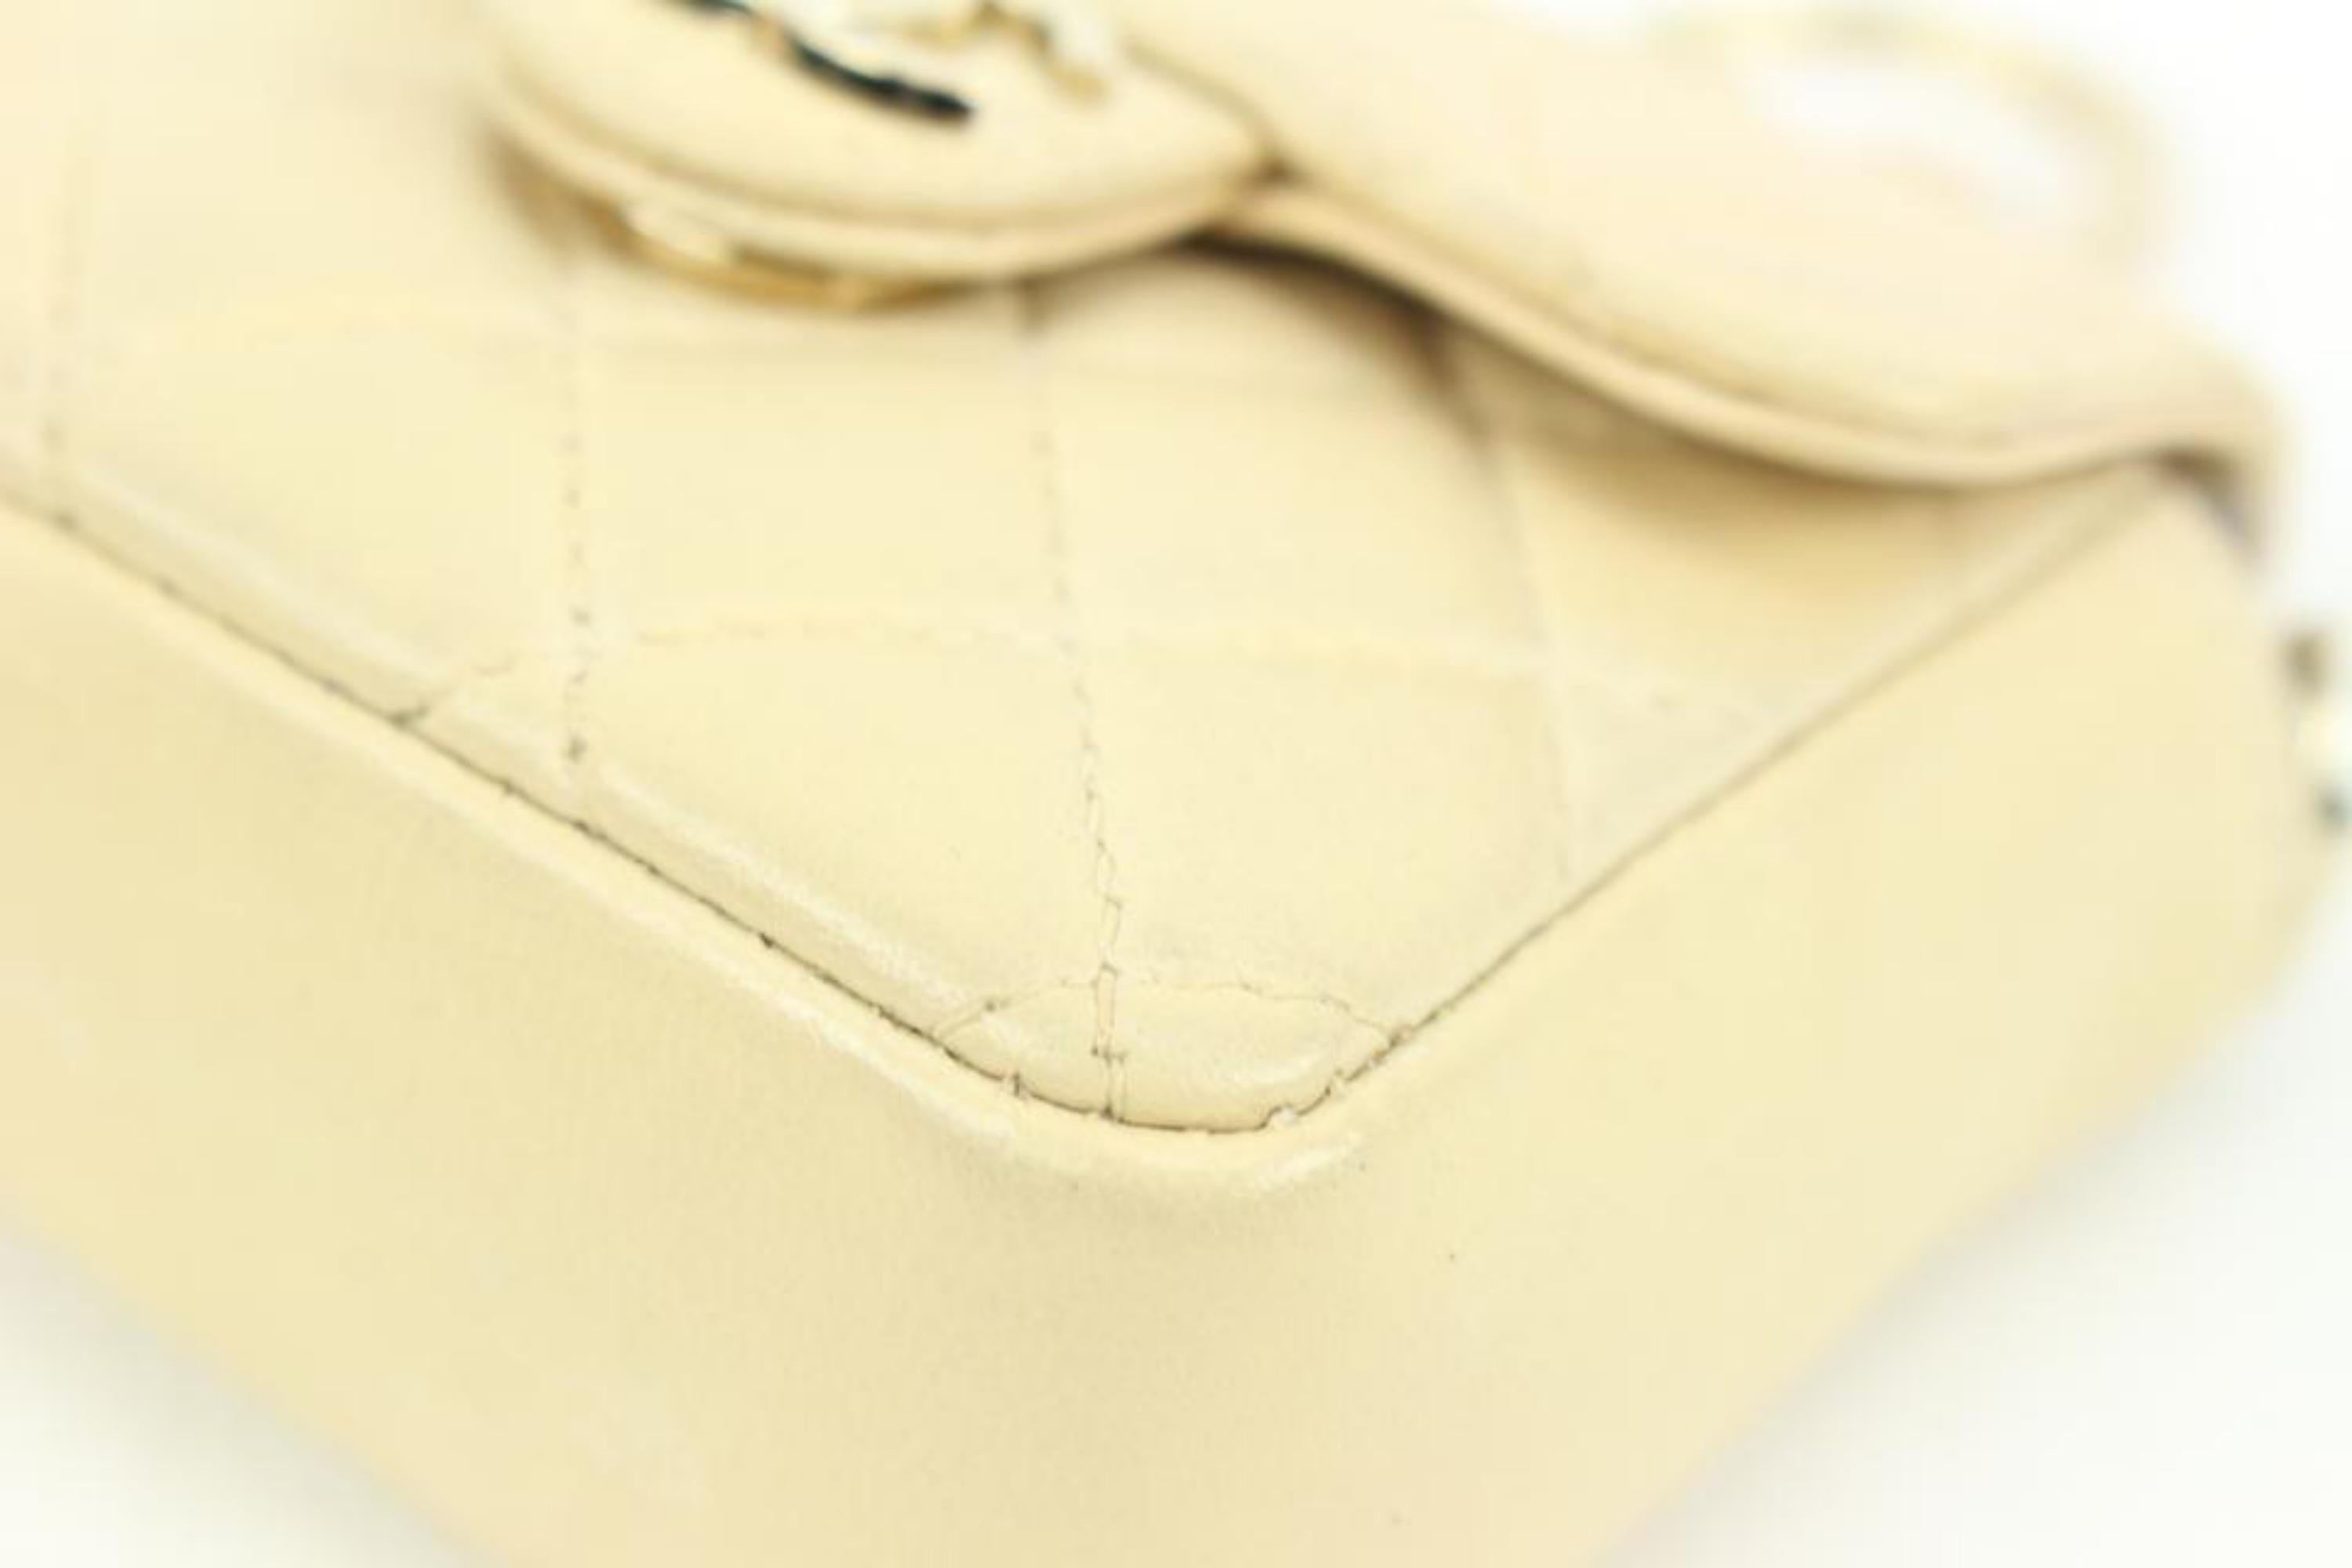 Chanel Light Beige Cream Quilted Leather Micro Flap Charm Bag Mini 48cz47 For Sale 3